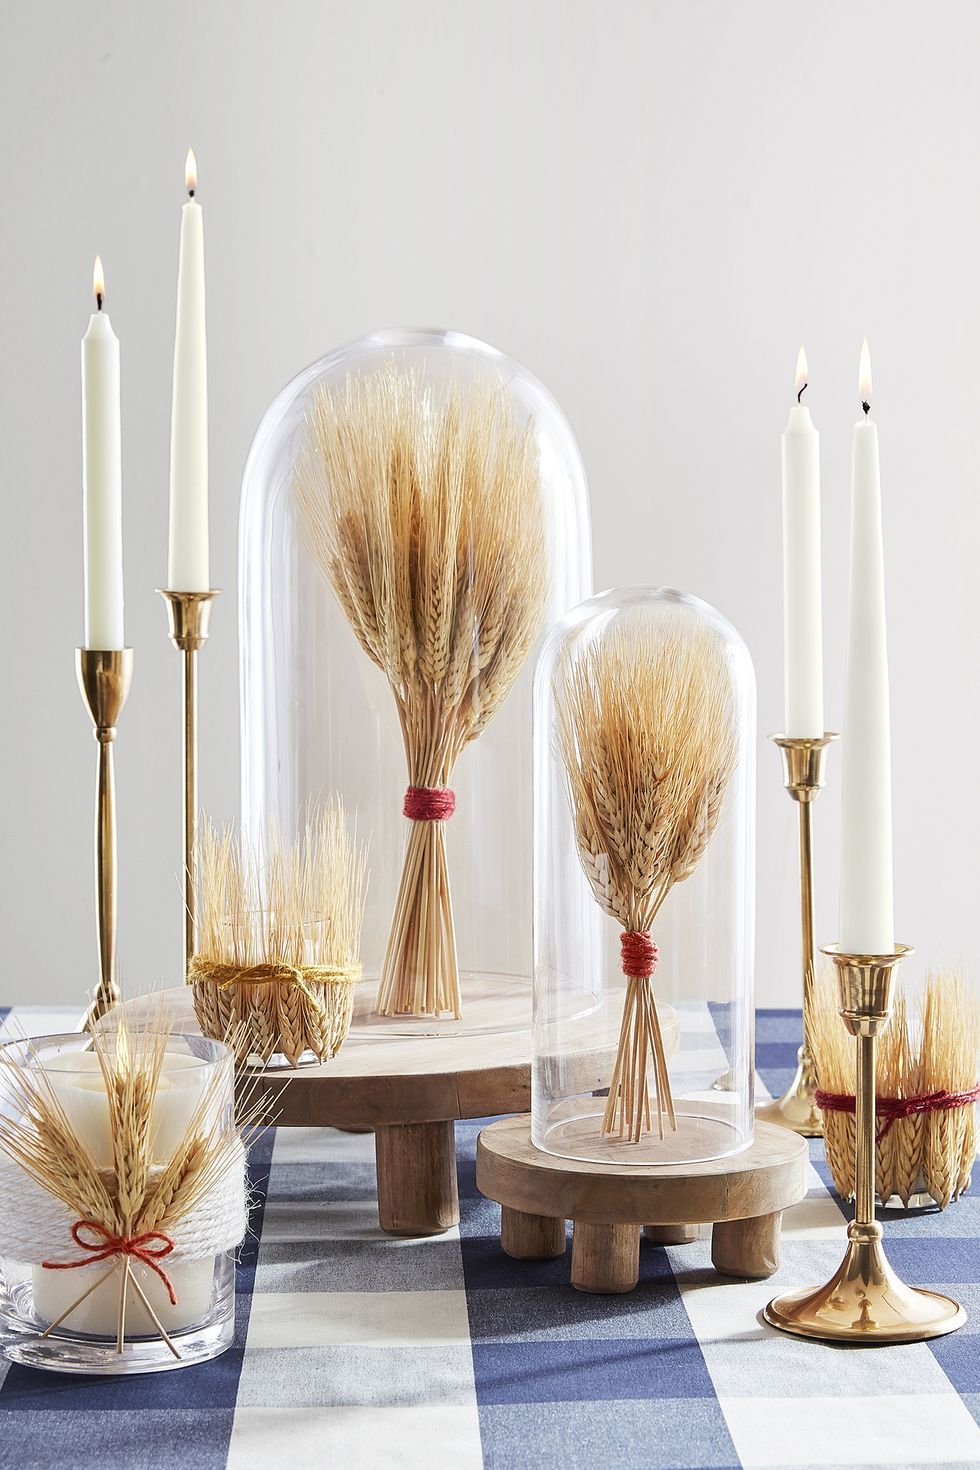 19 Decorative candle holders to wax lyrical about | House & Garden